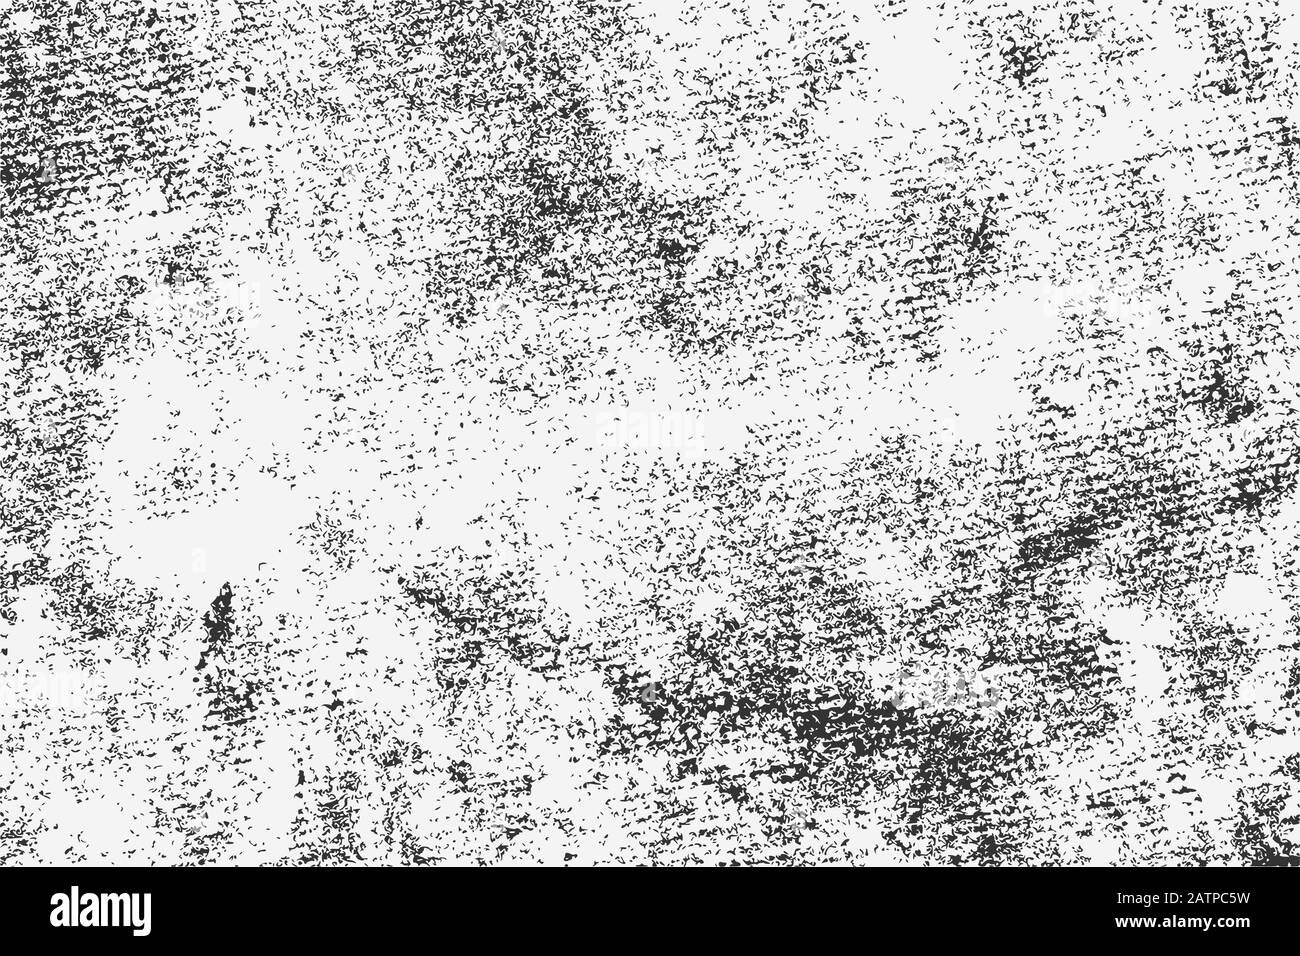 Abstract grunge overlay texture. Vector illustration of black and white grunge background for your design Stock Vector